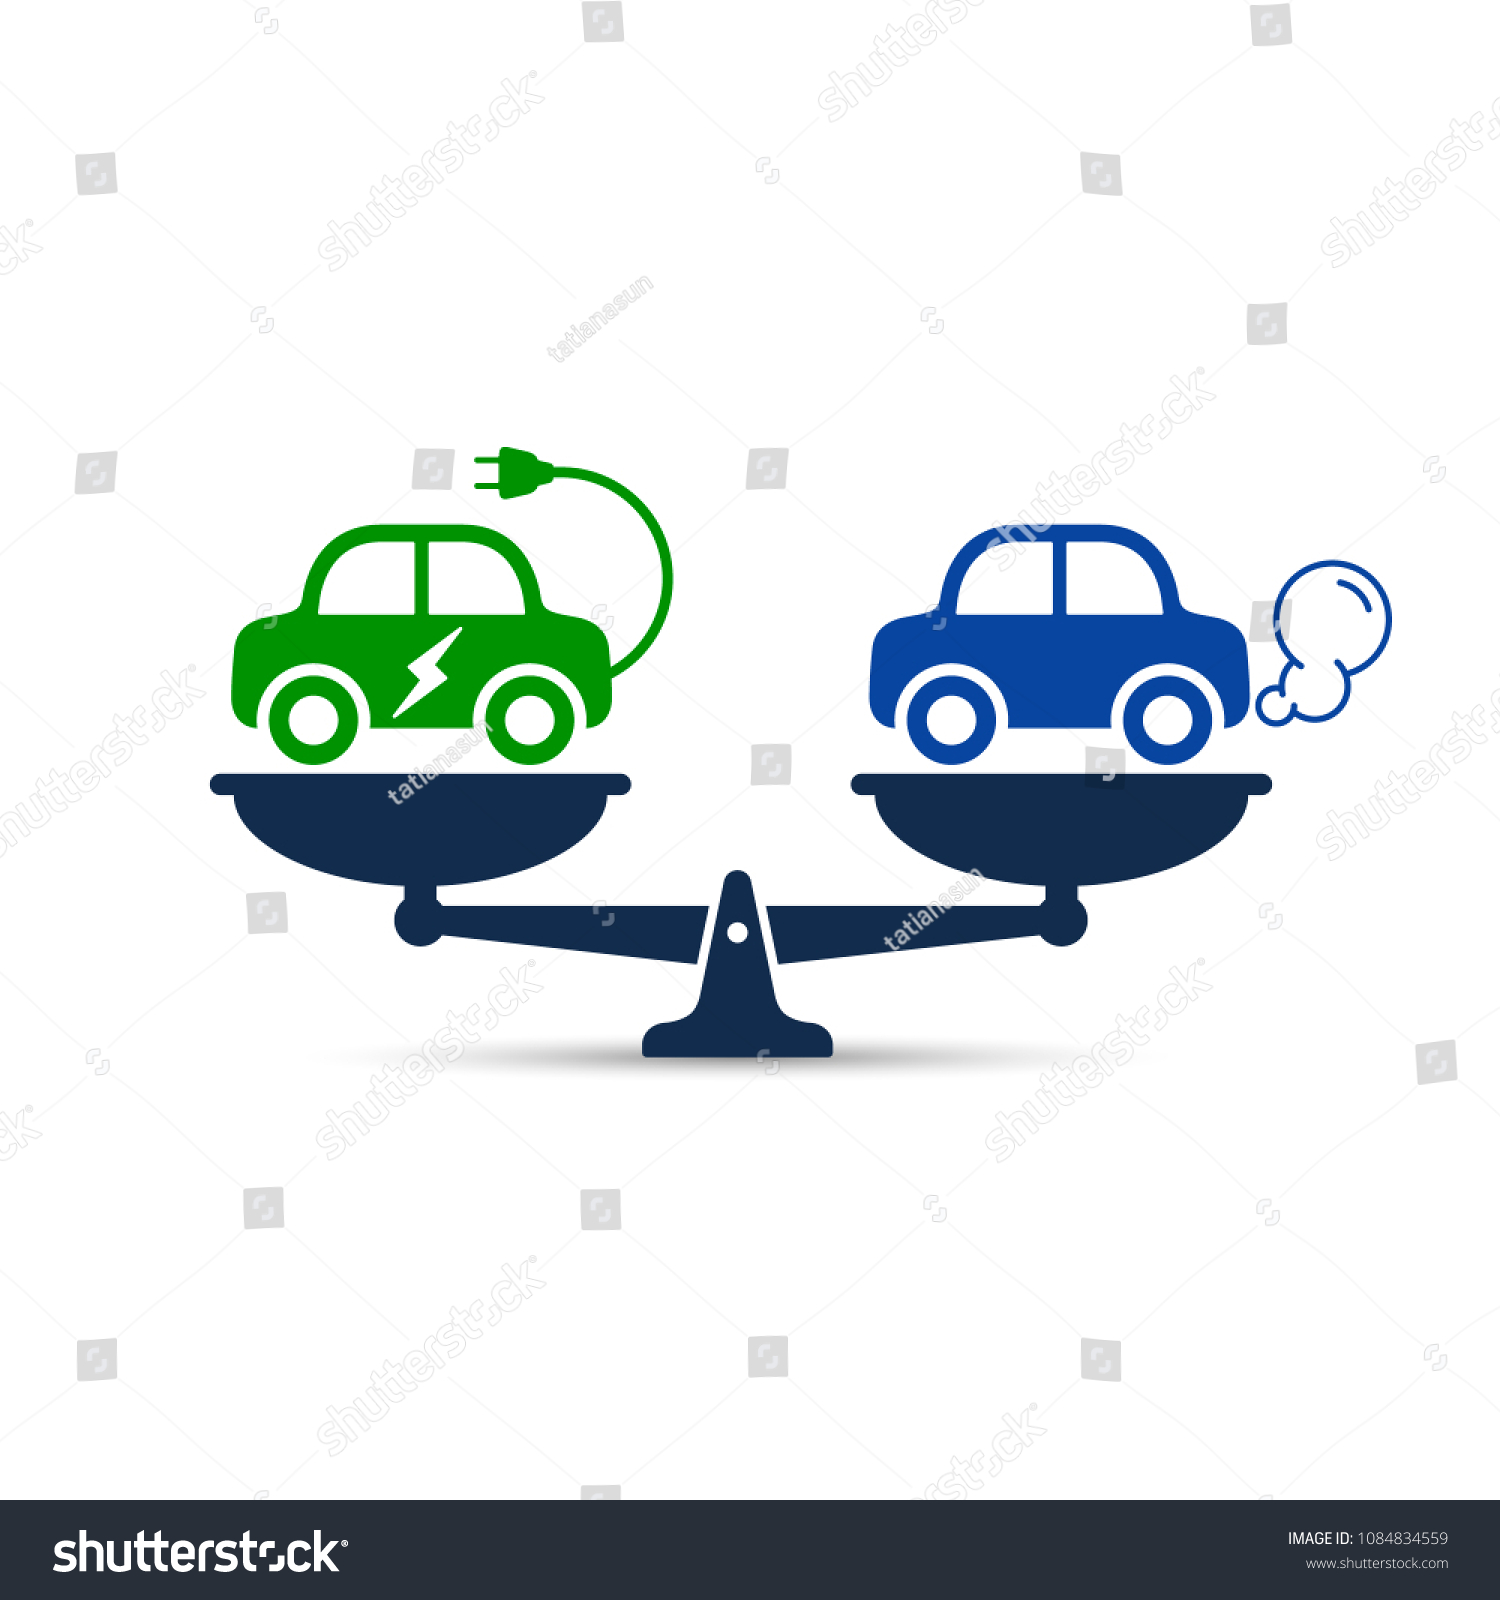 Electric car versus gasoline and diesel car on scales icon. Comparison between electric environmentally friendly and gas polluting car. #1084834559